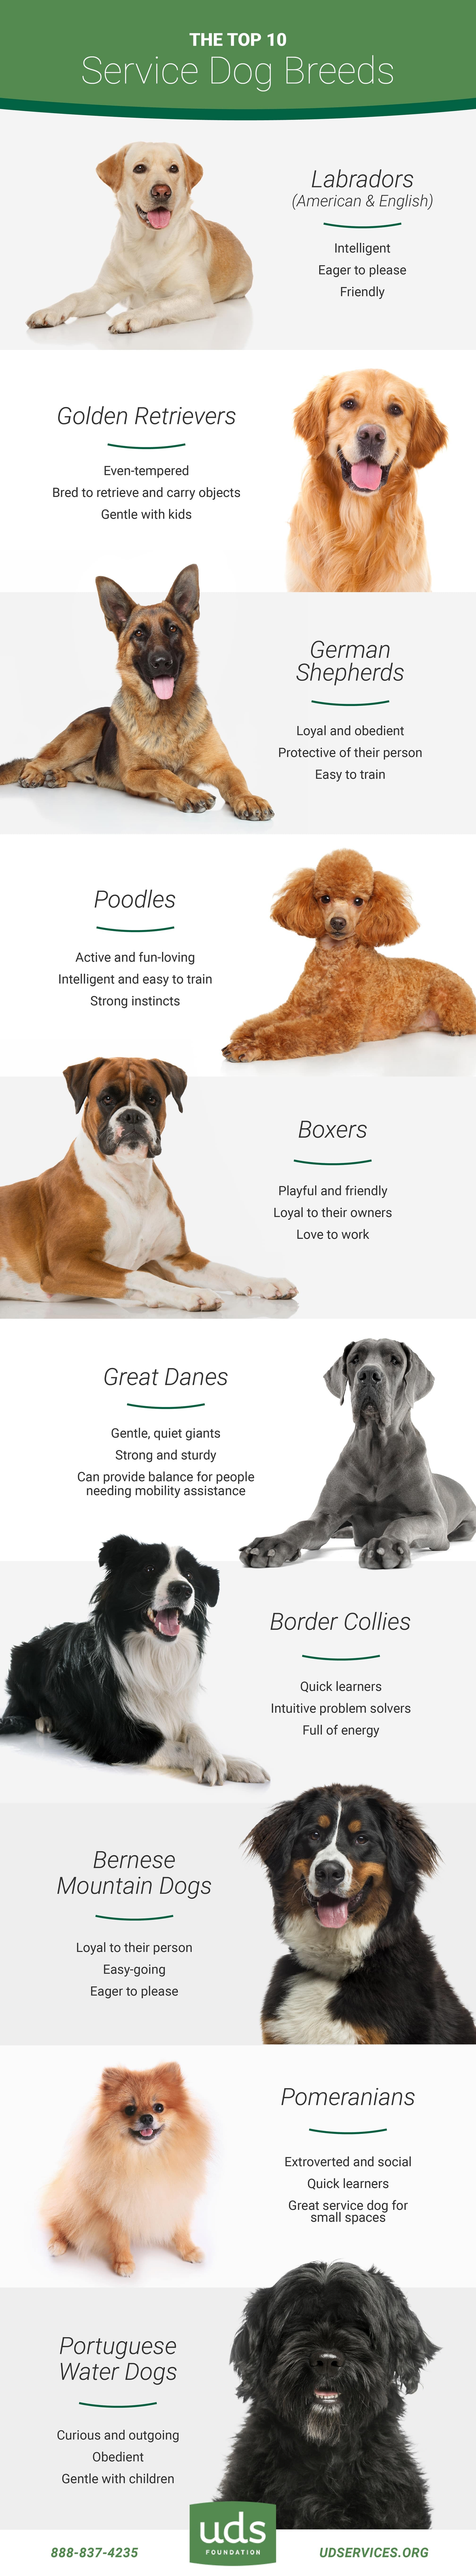 Types of Service Dogs and How They Benefit People with Disabilities